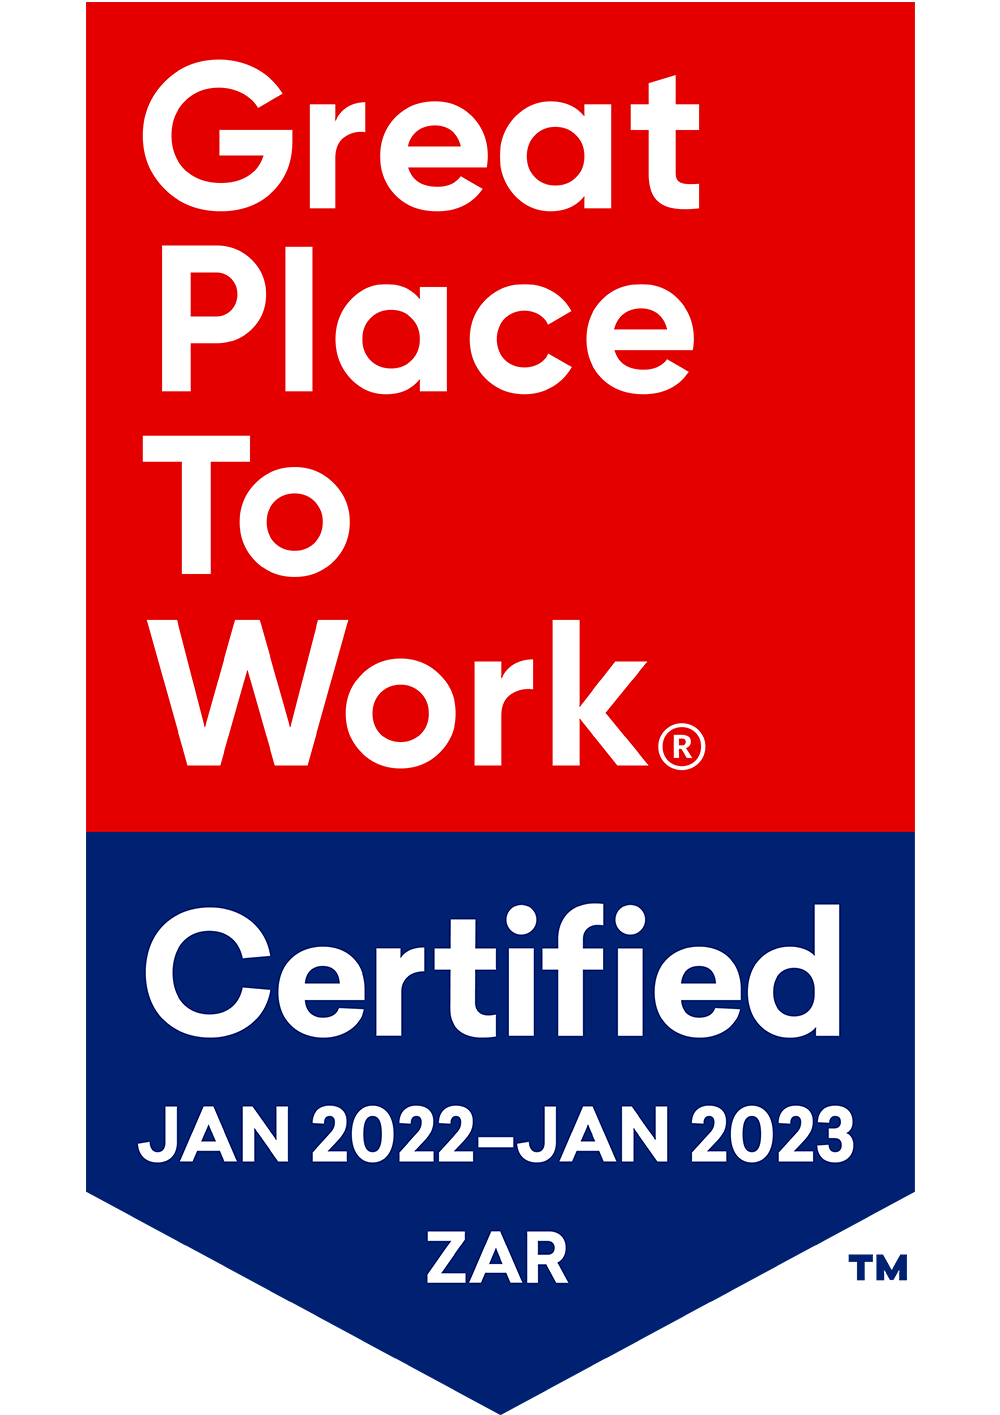 Great Place To Work Badge - South Africa